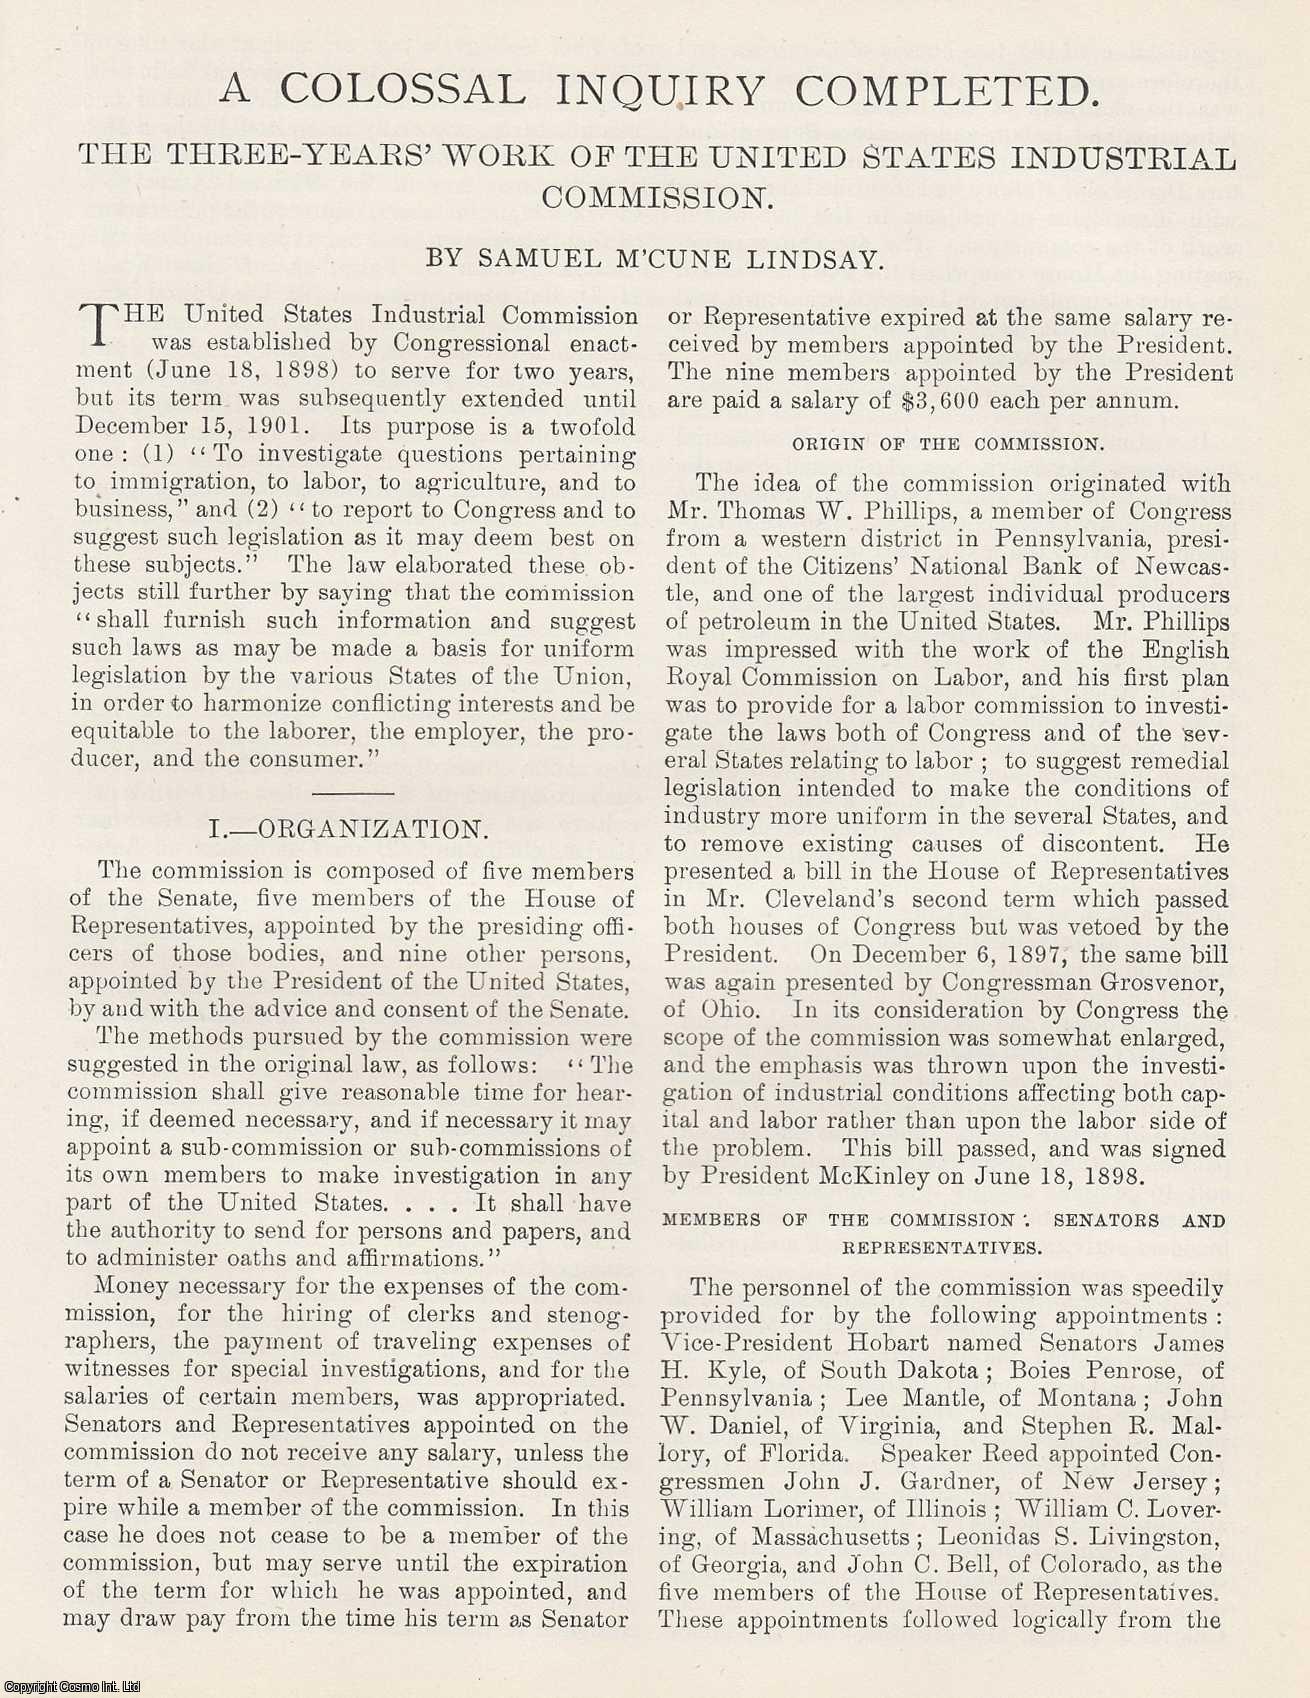 Samuel McCune Lindsay - The Three Years Work of the United States Industrial Commission on Immigration, Labor, Agriculture and Business. A Colossal Inquiry Completed. An original article from the American Review of Reviews, 1901.